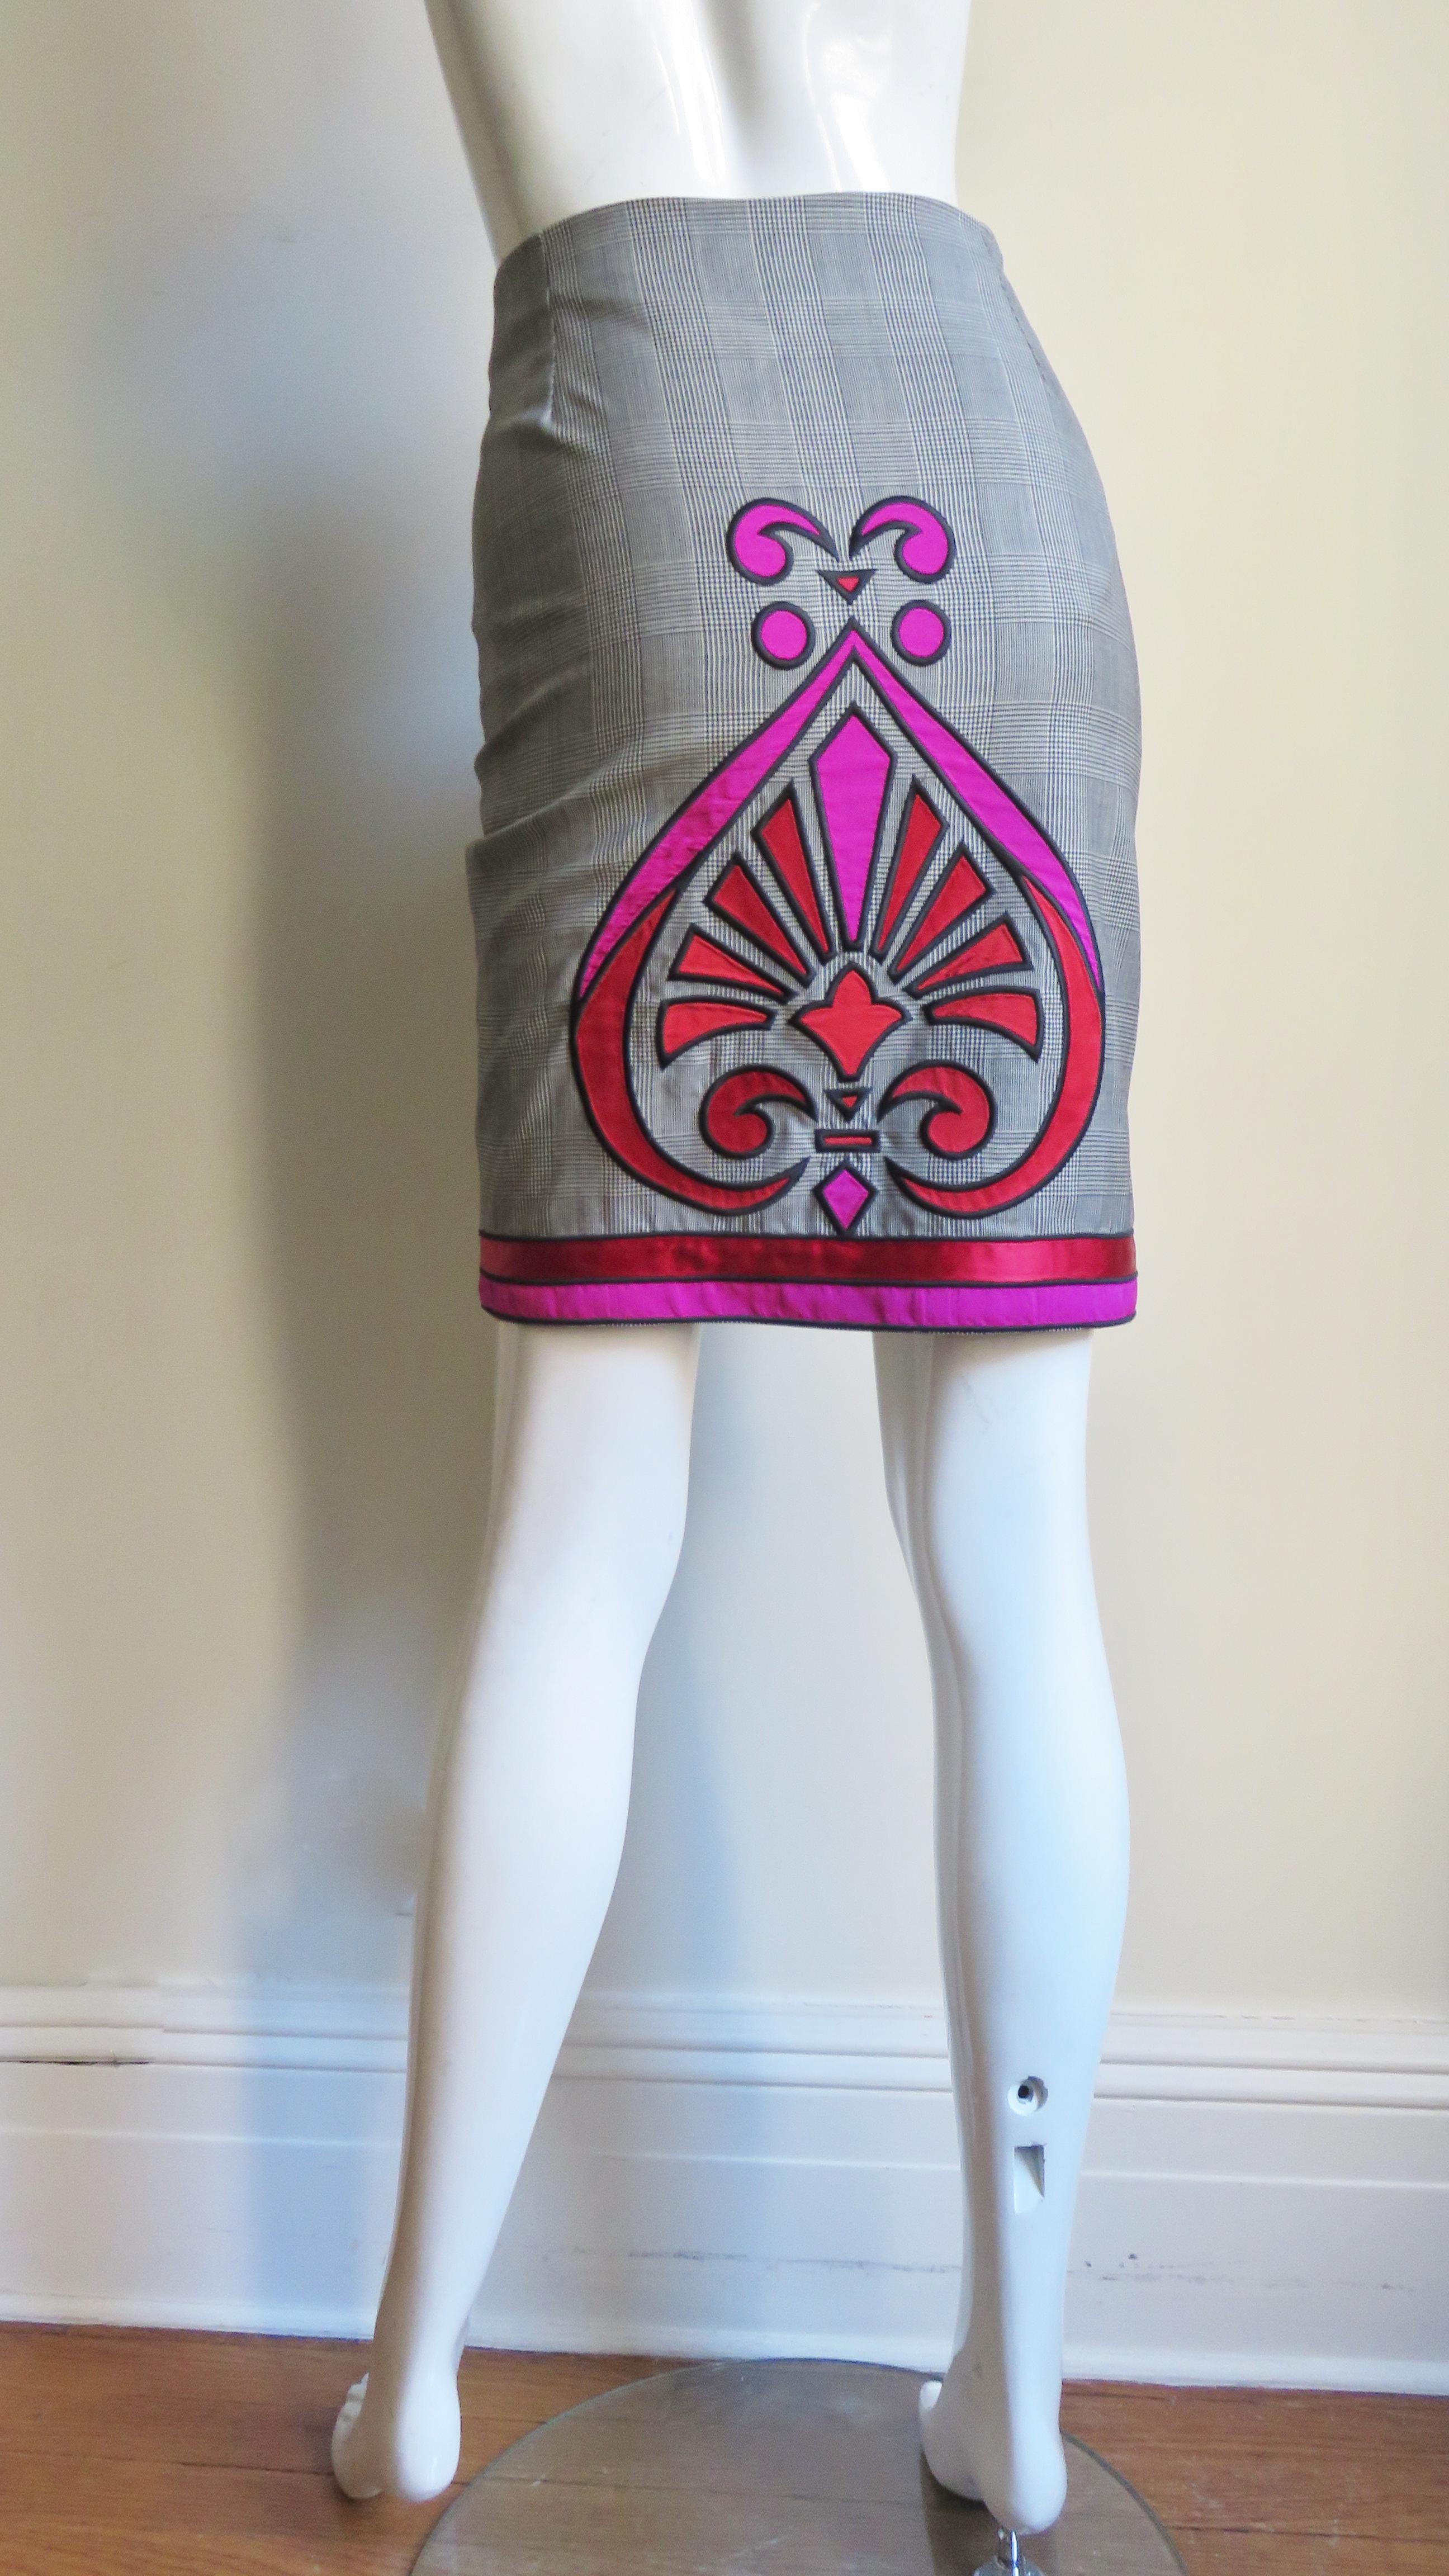 Gianni Versace Reversible Skirt with Elaborate Applique 1990s For Sale 7